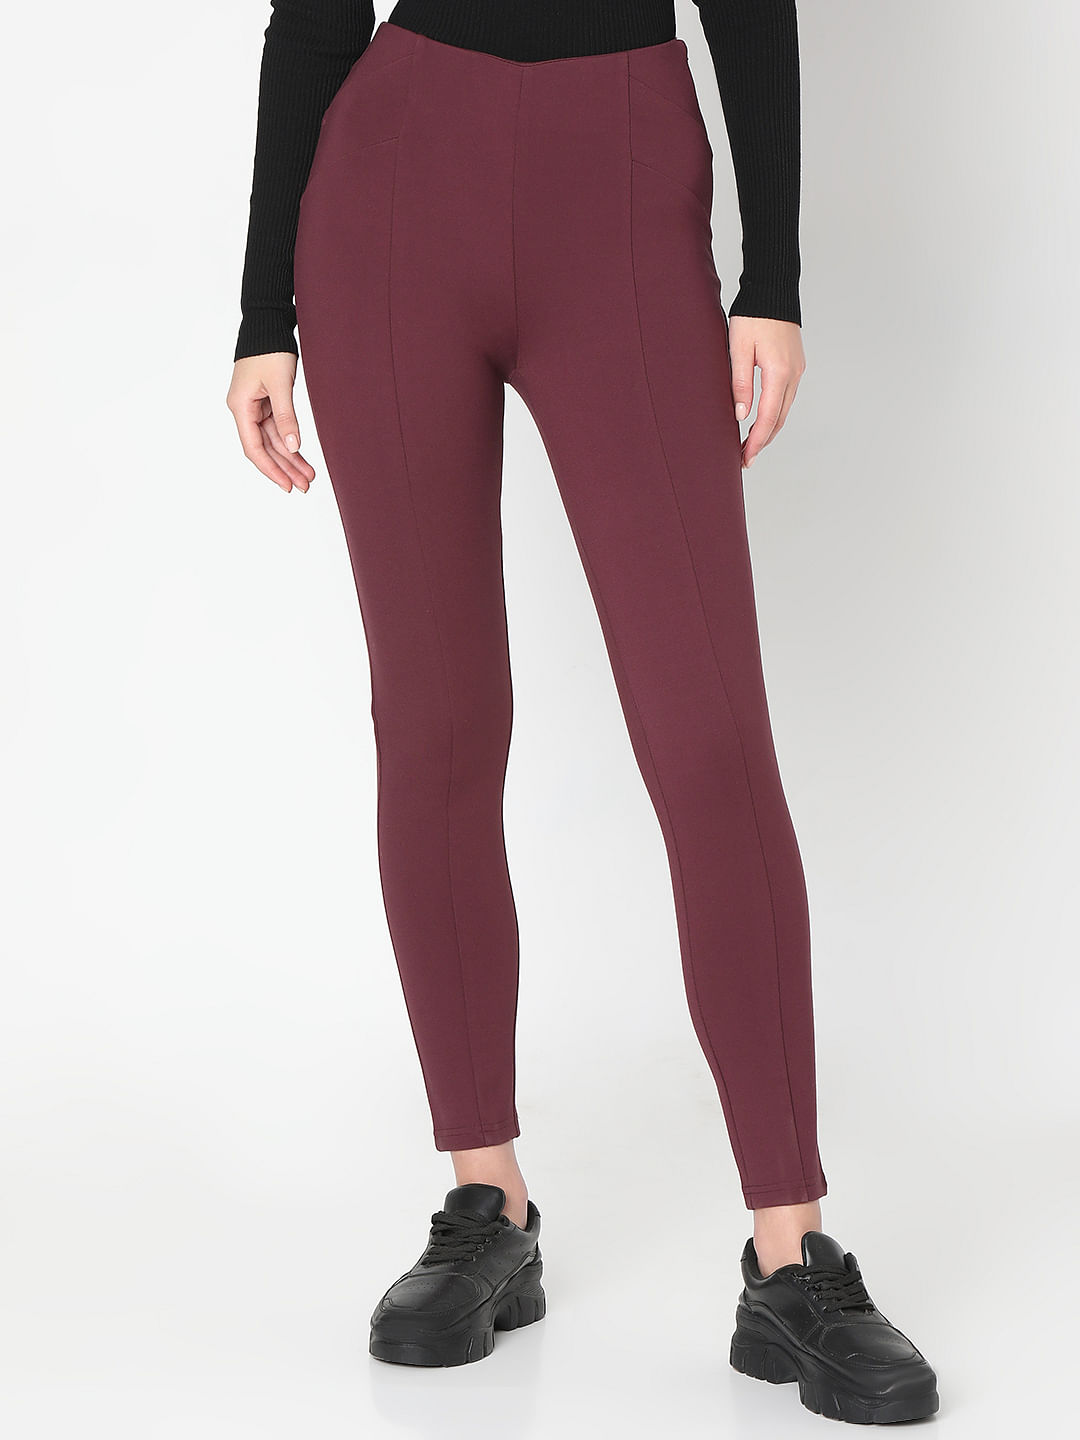 Spacedye Caught In the Midi High Waisted Legging in Burgundy | Wantable